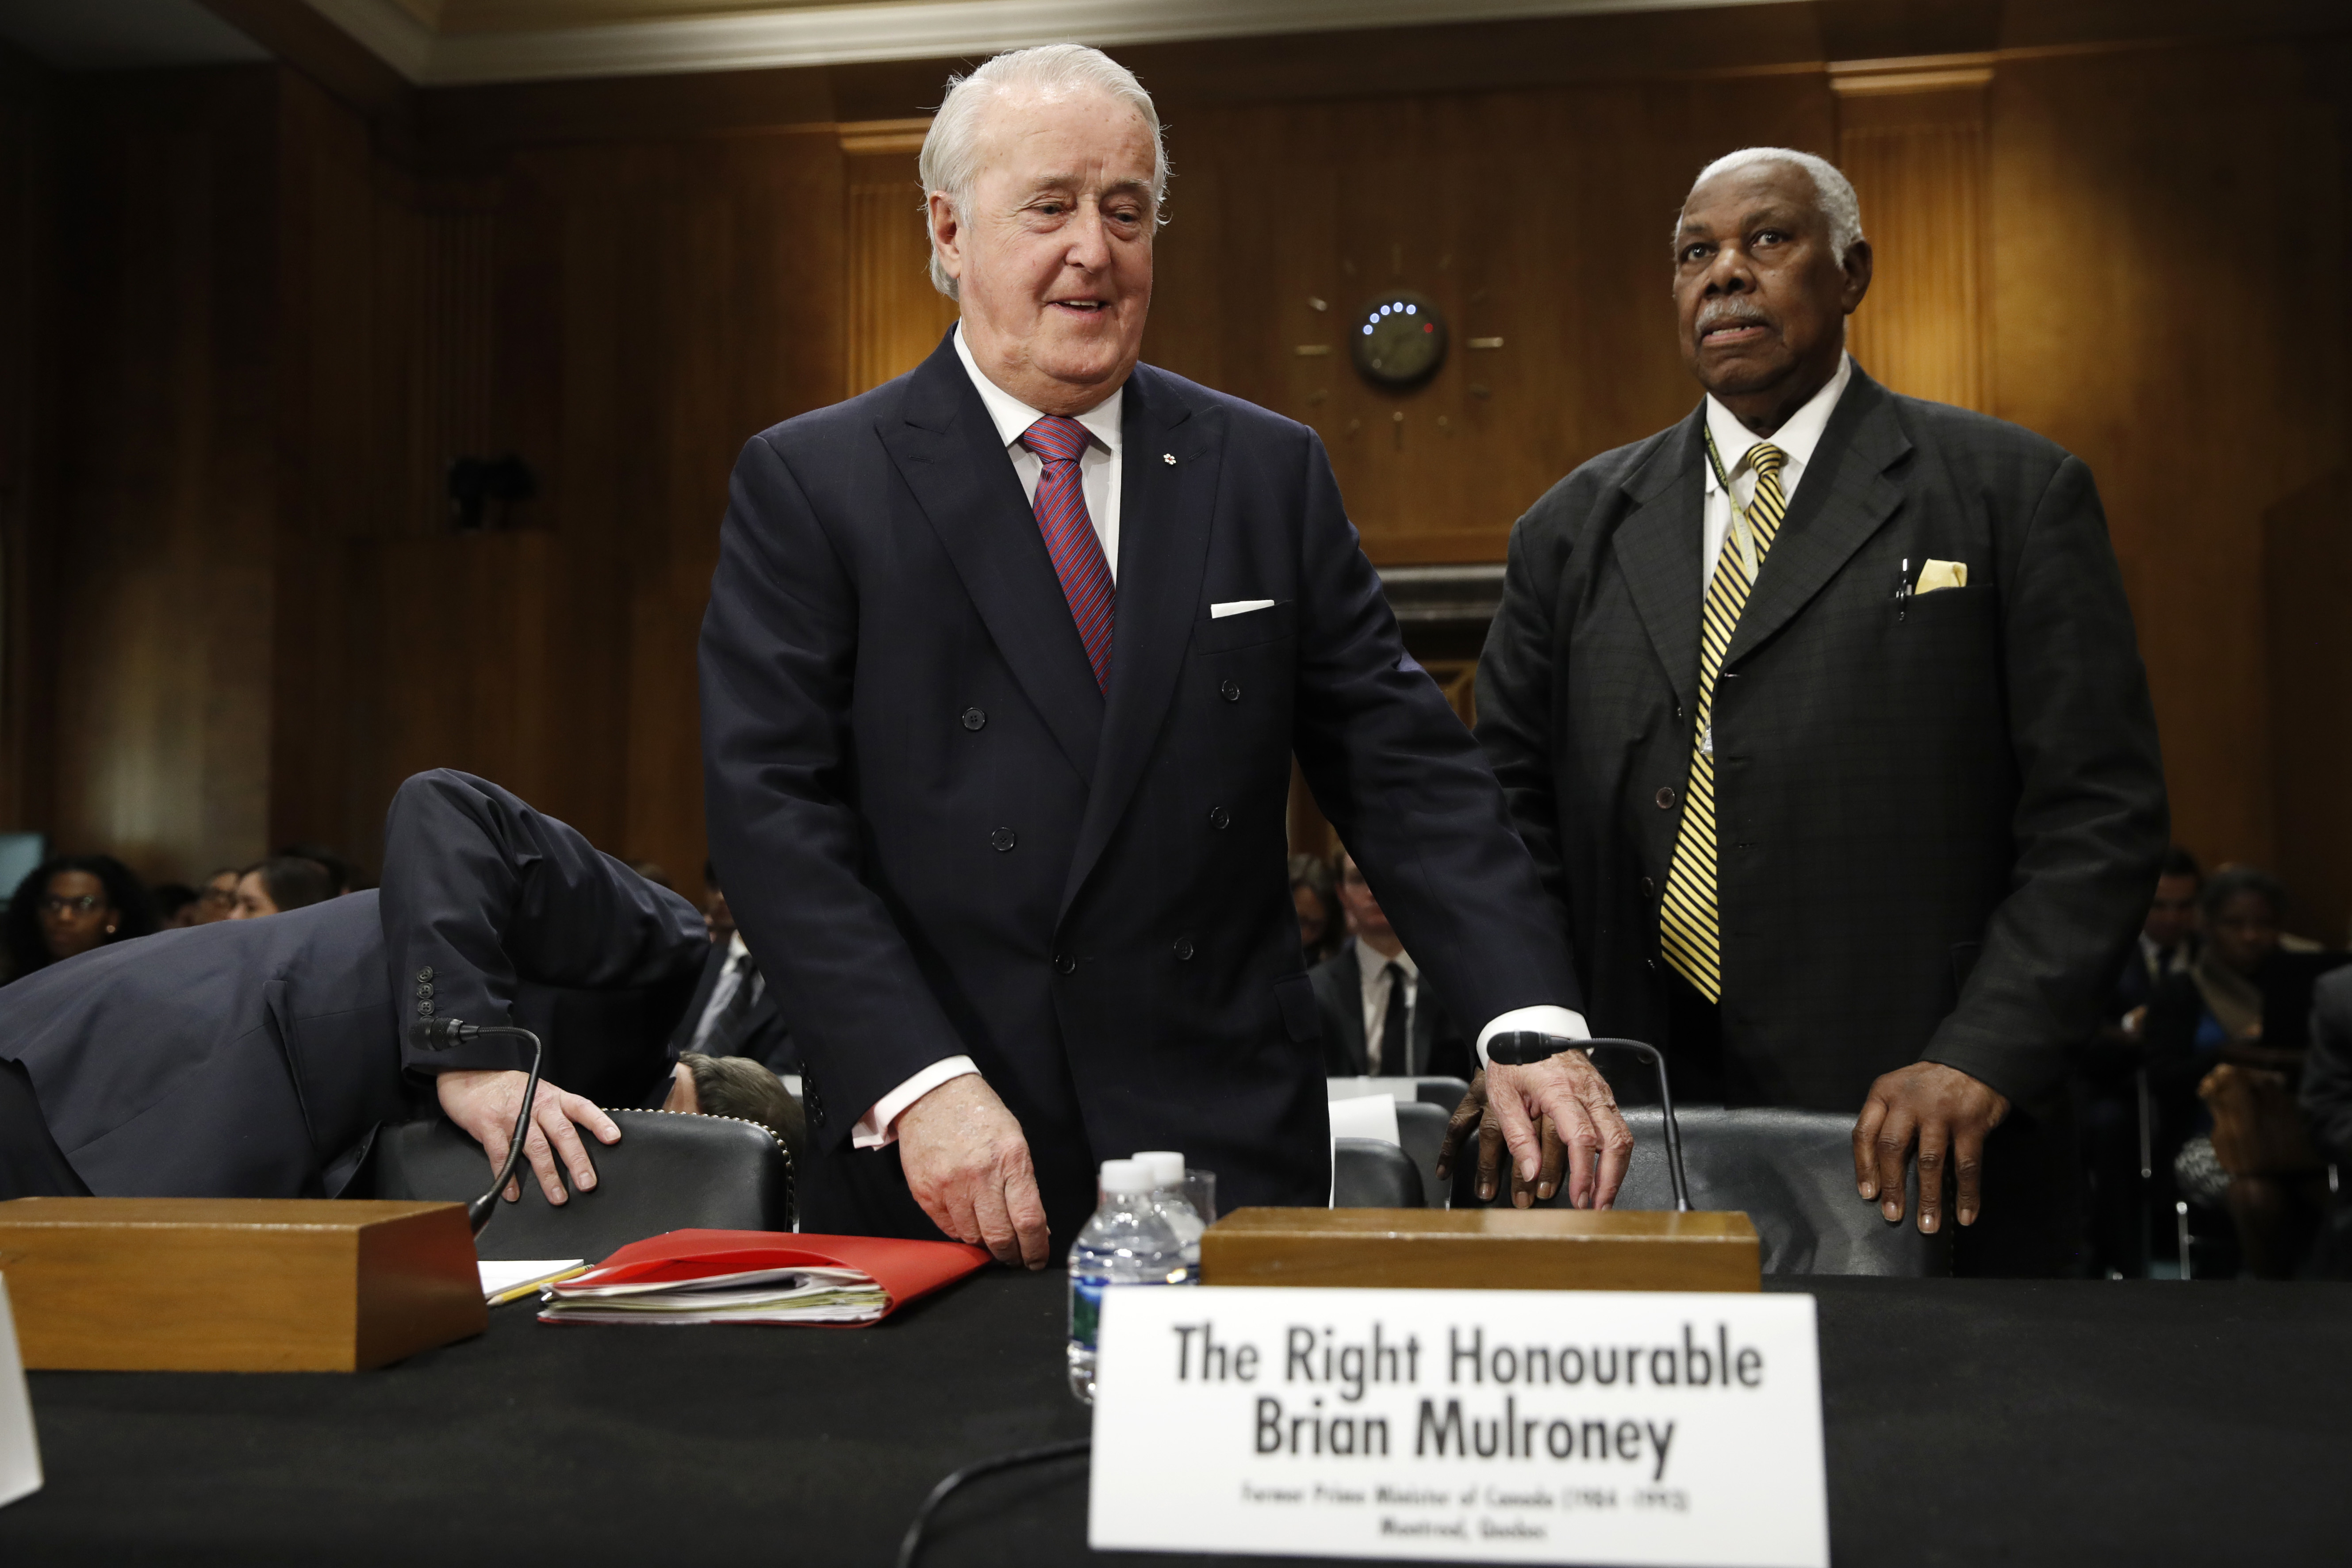 FILE - Brian Mulroney, the former prime minister of Canada, center, takes his seat for a Senate Foreign Relations Committee hearing on the Canada-U.S.-Mexico relationship, Tuesday, Jan. 30, 2018, on Capitol Hill in Washington. Mulroney has died at the age of 84, his daughter Caroline Mulroney posted on social media, Thursday, Feb. 29, 2024. (AP Photo/Jacquelyn Martin, File)